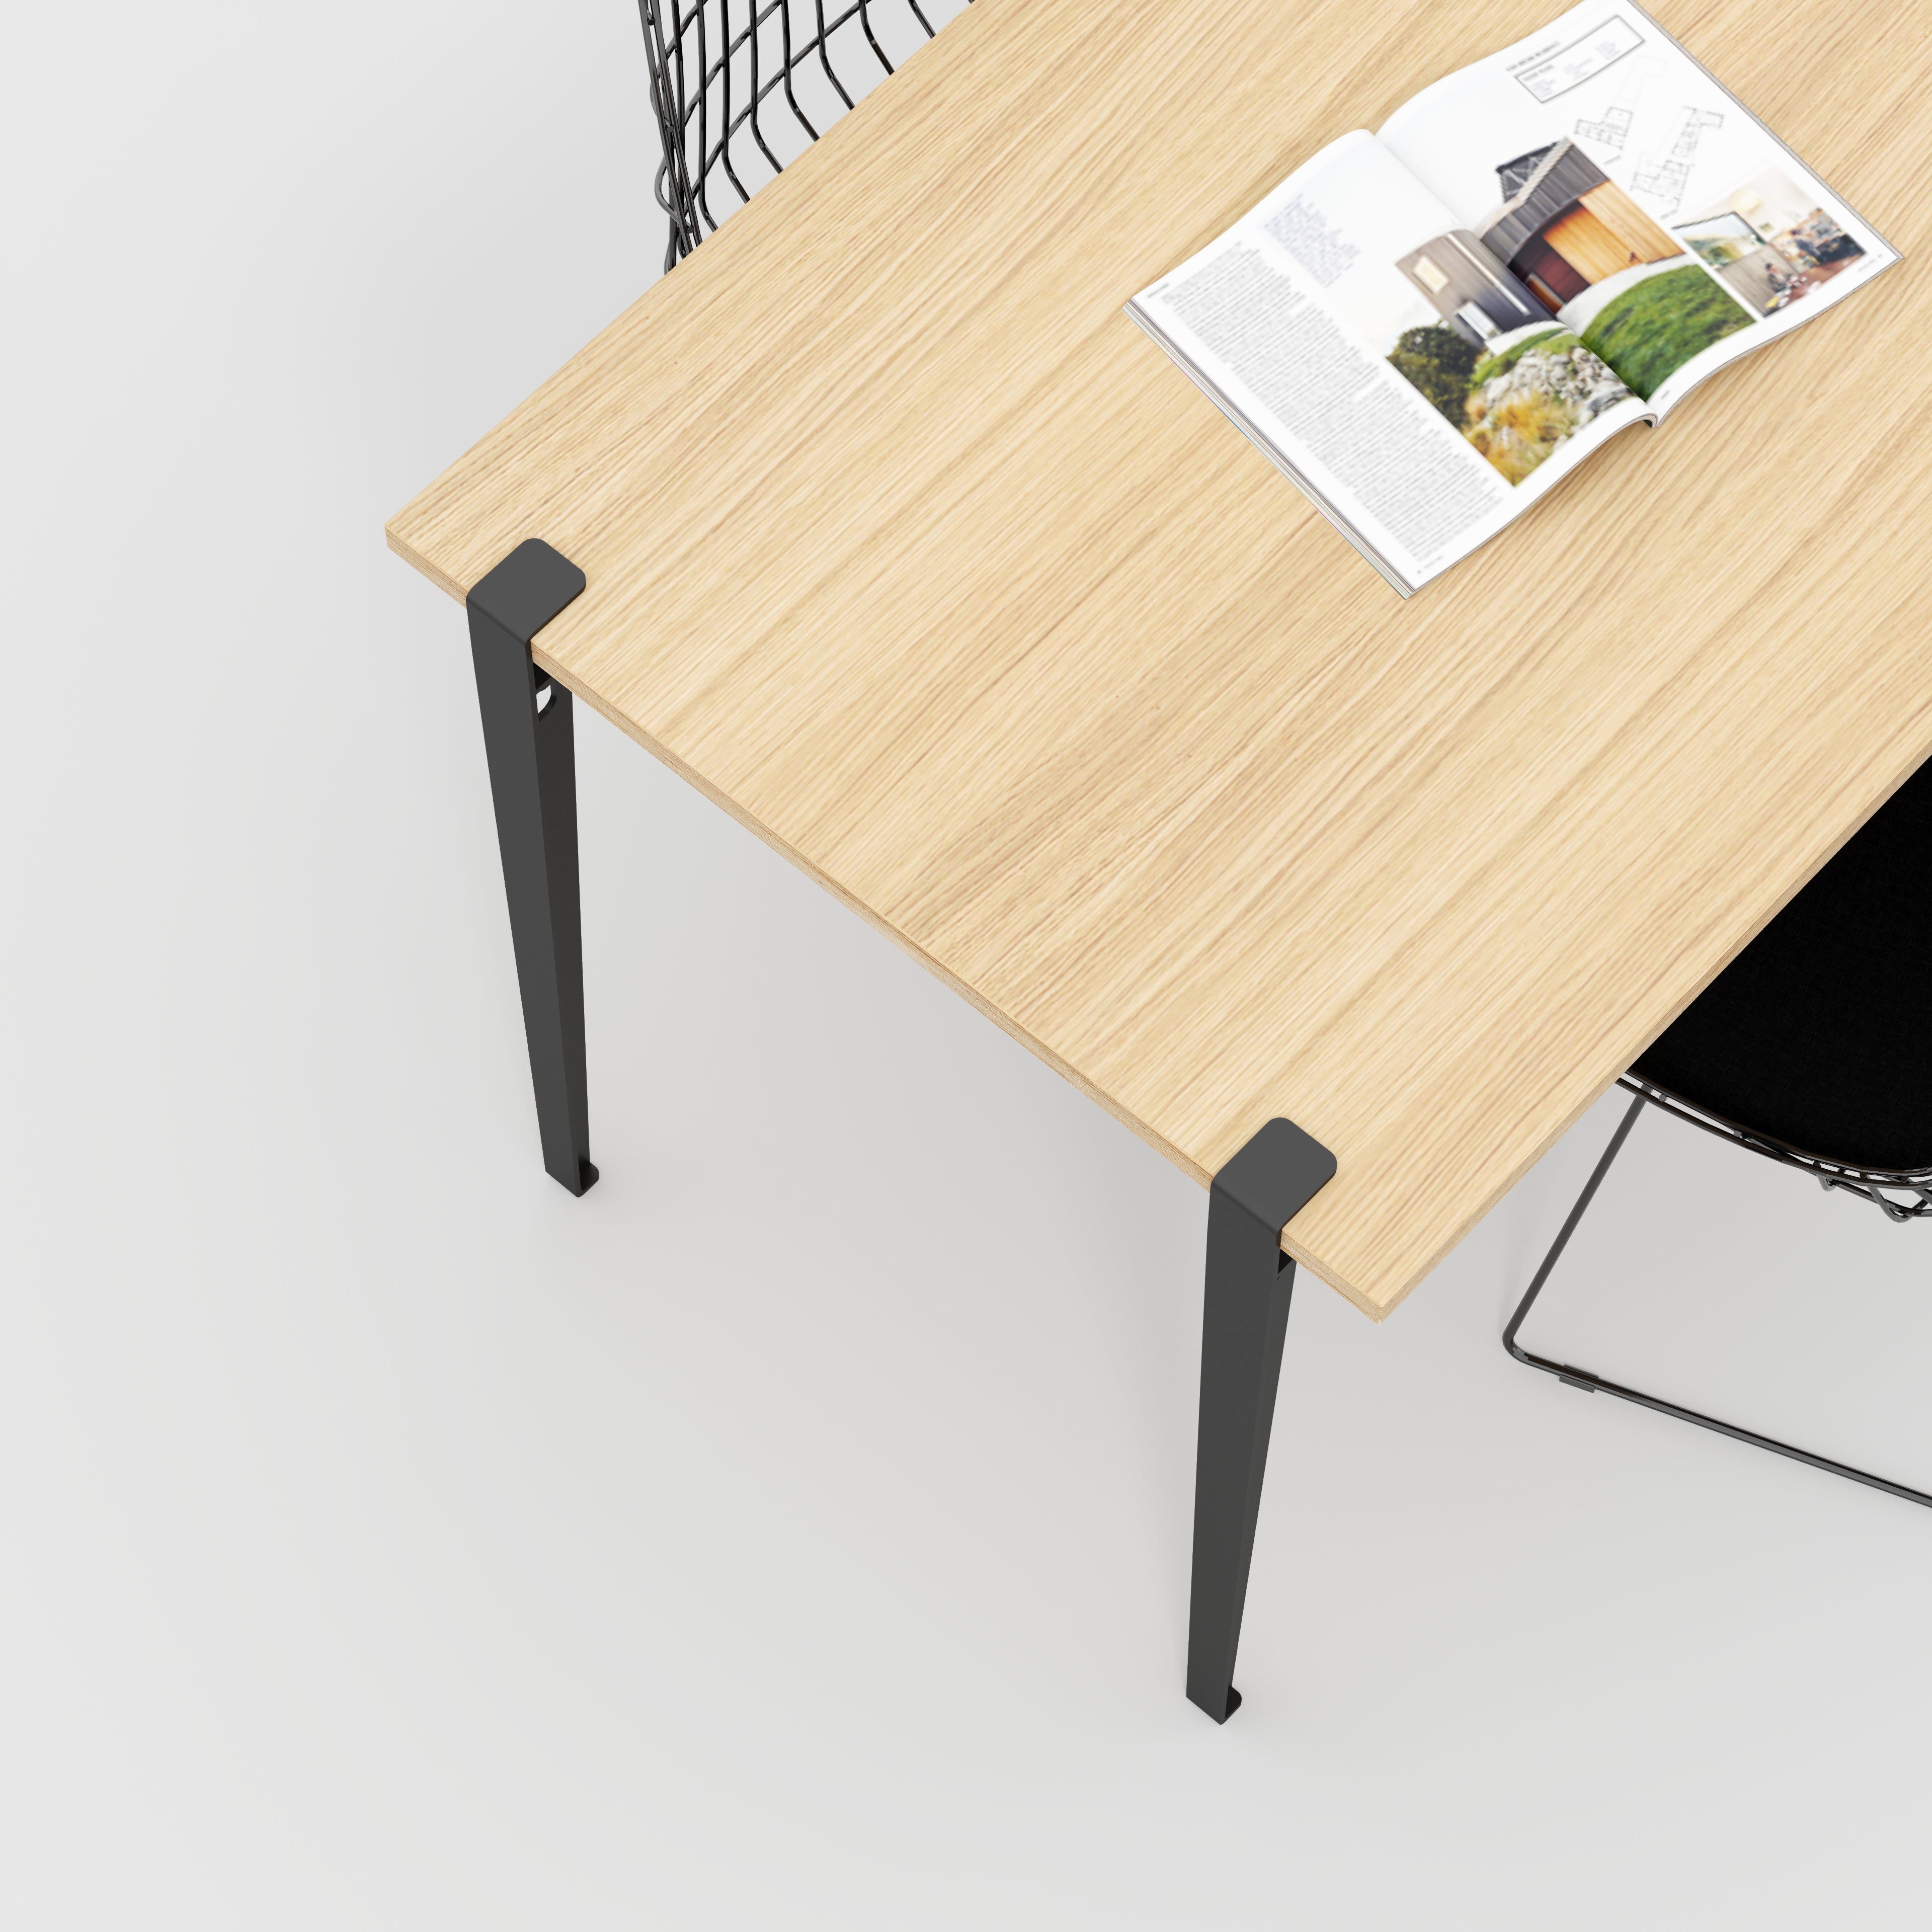 Wall Table with Black Tiptoe Legs and Brackets - Plywood Oak - 1200(w) x 800(d) x 750(h)